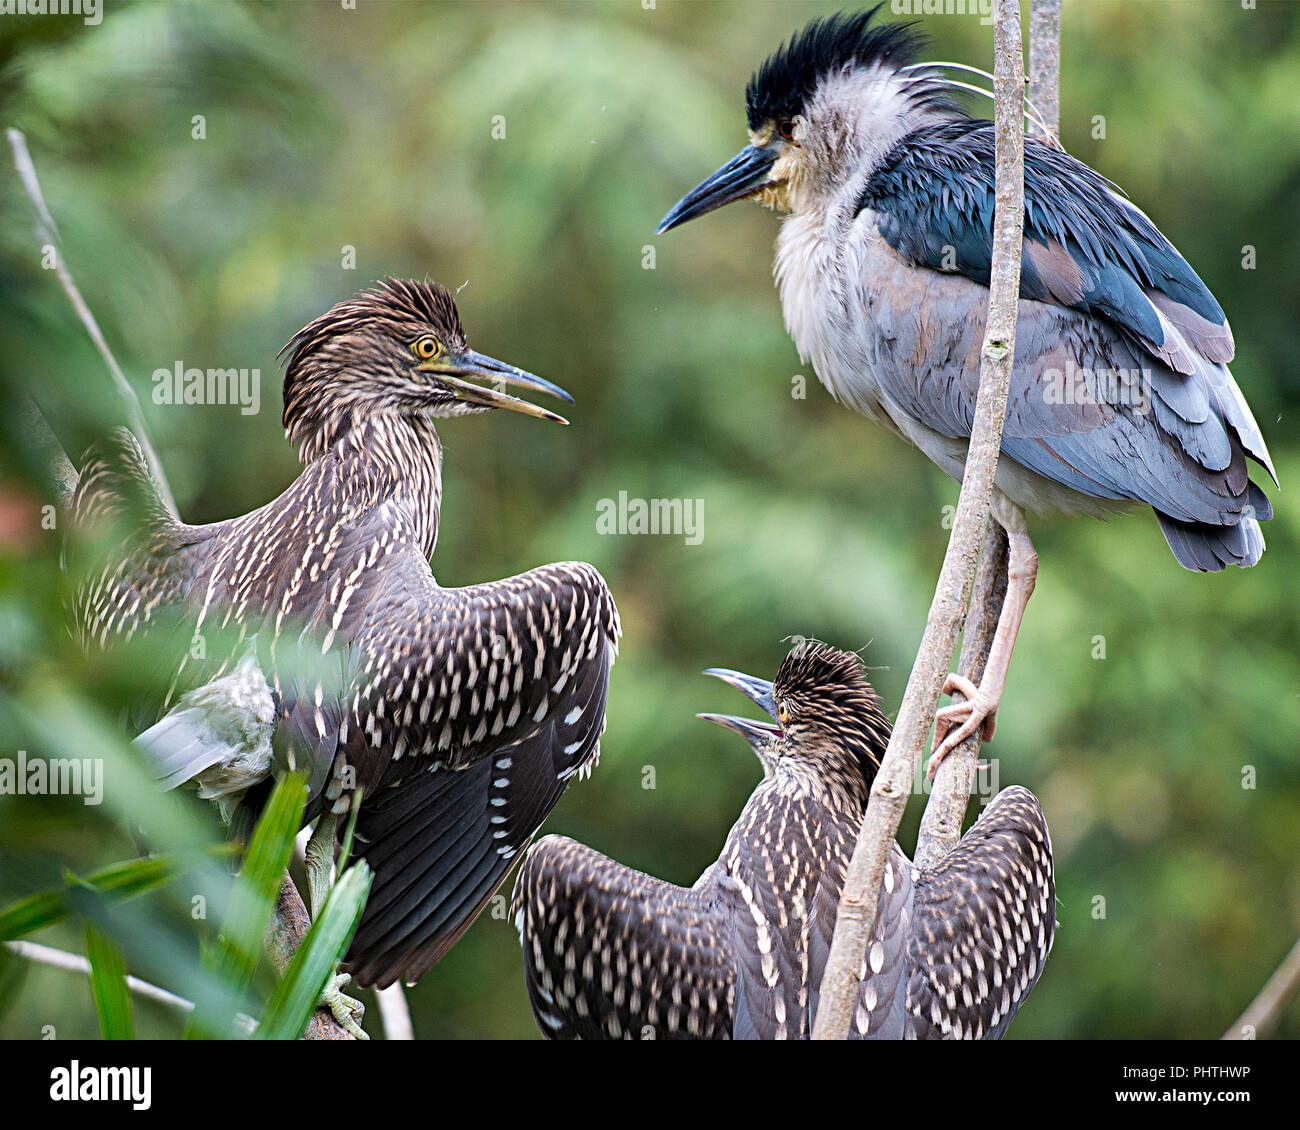 Black-Crowned Night-Heron mother and baby birds in its environment. Stock Photo